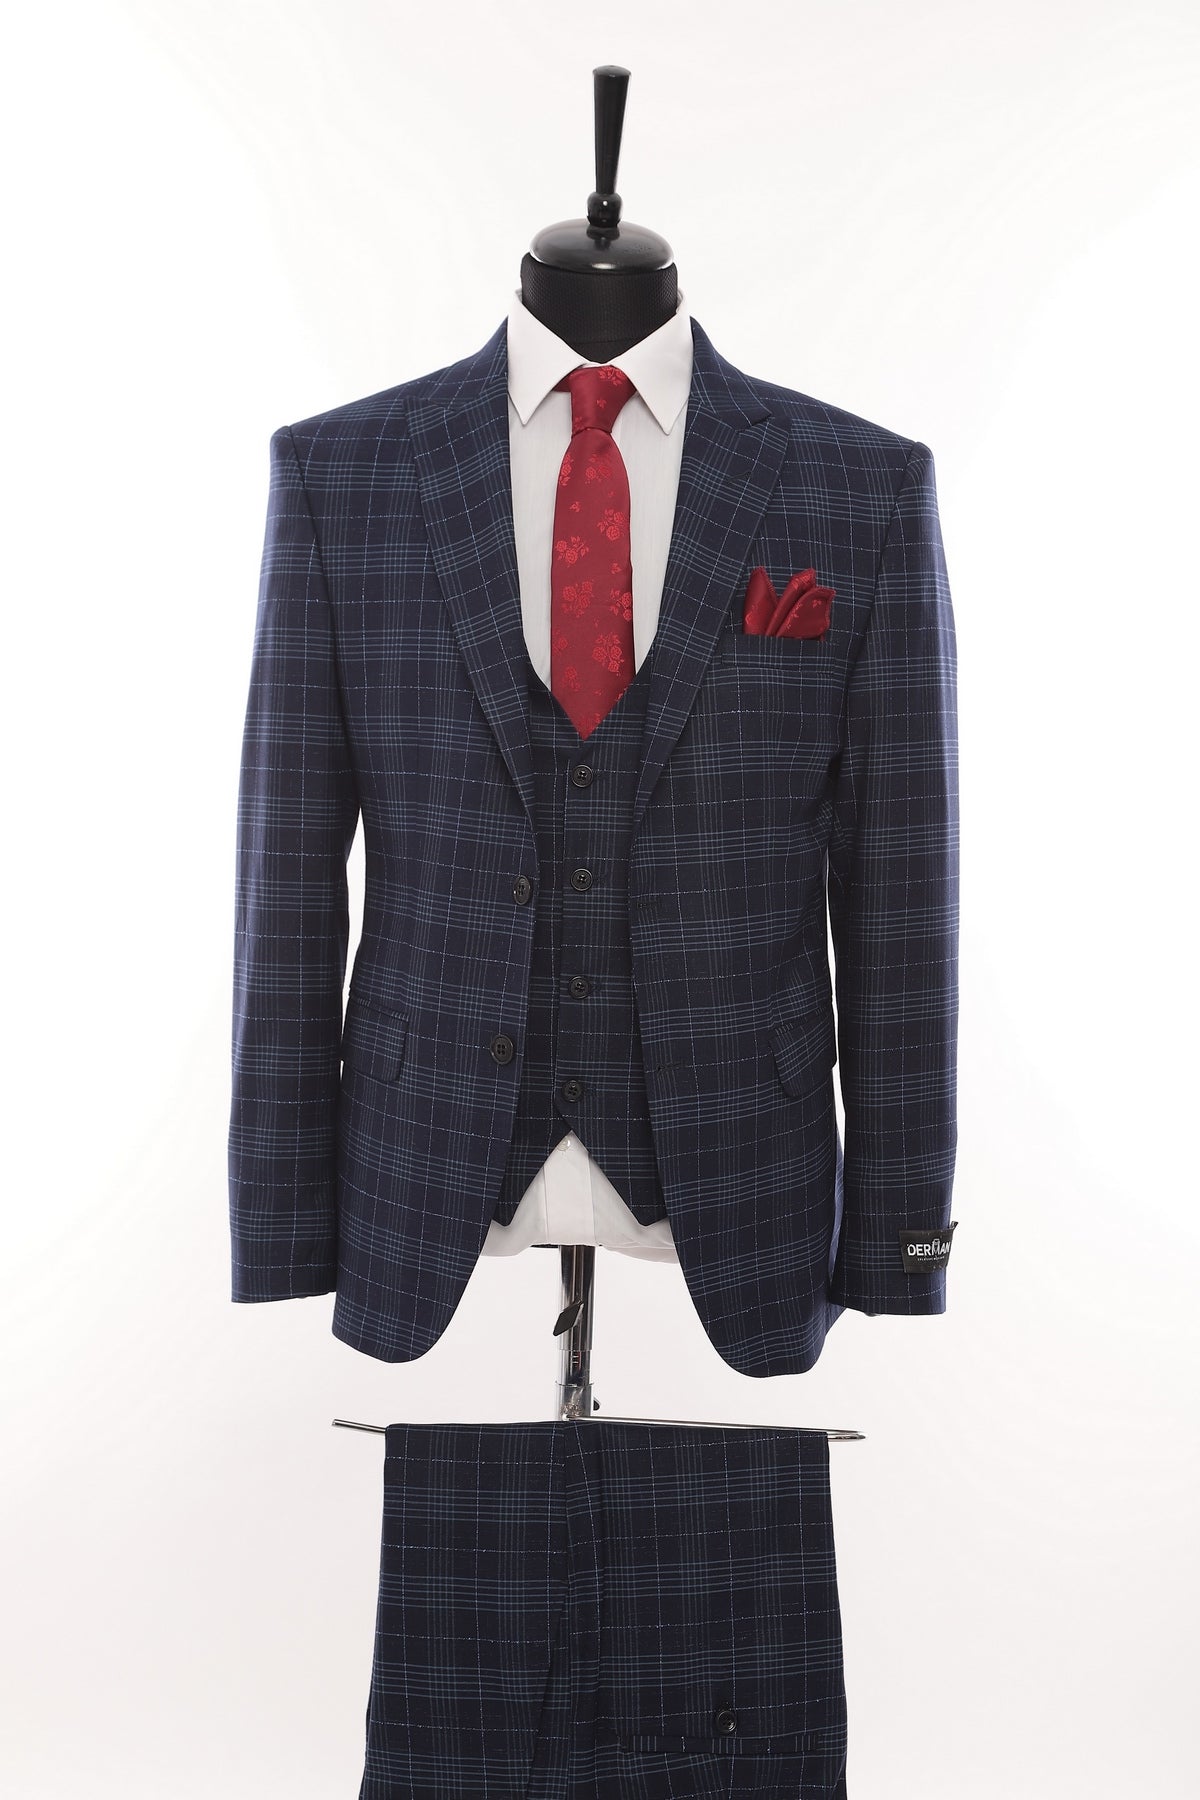 Double Breasted Navy Square Patterned Fabric 3 Piece Suit